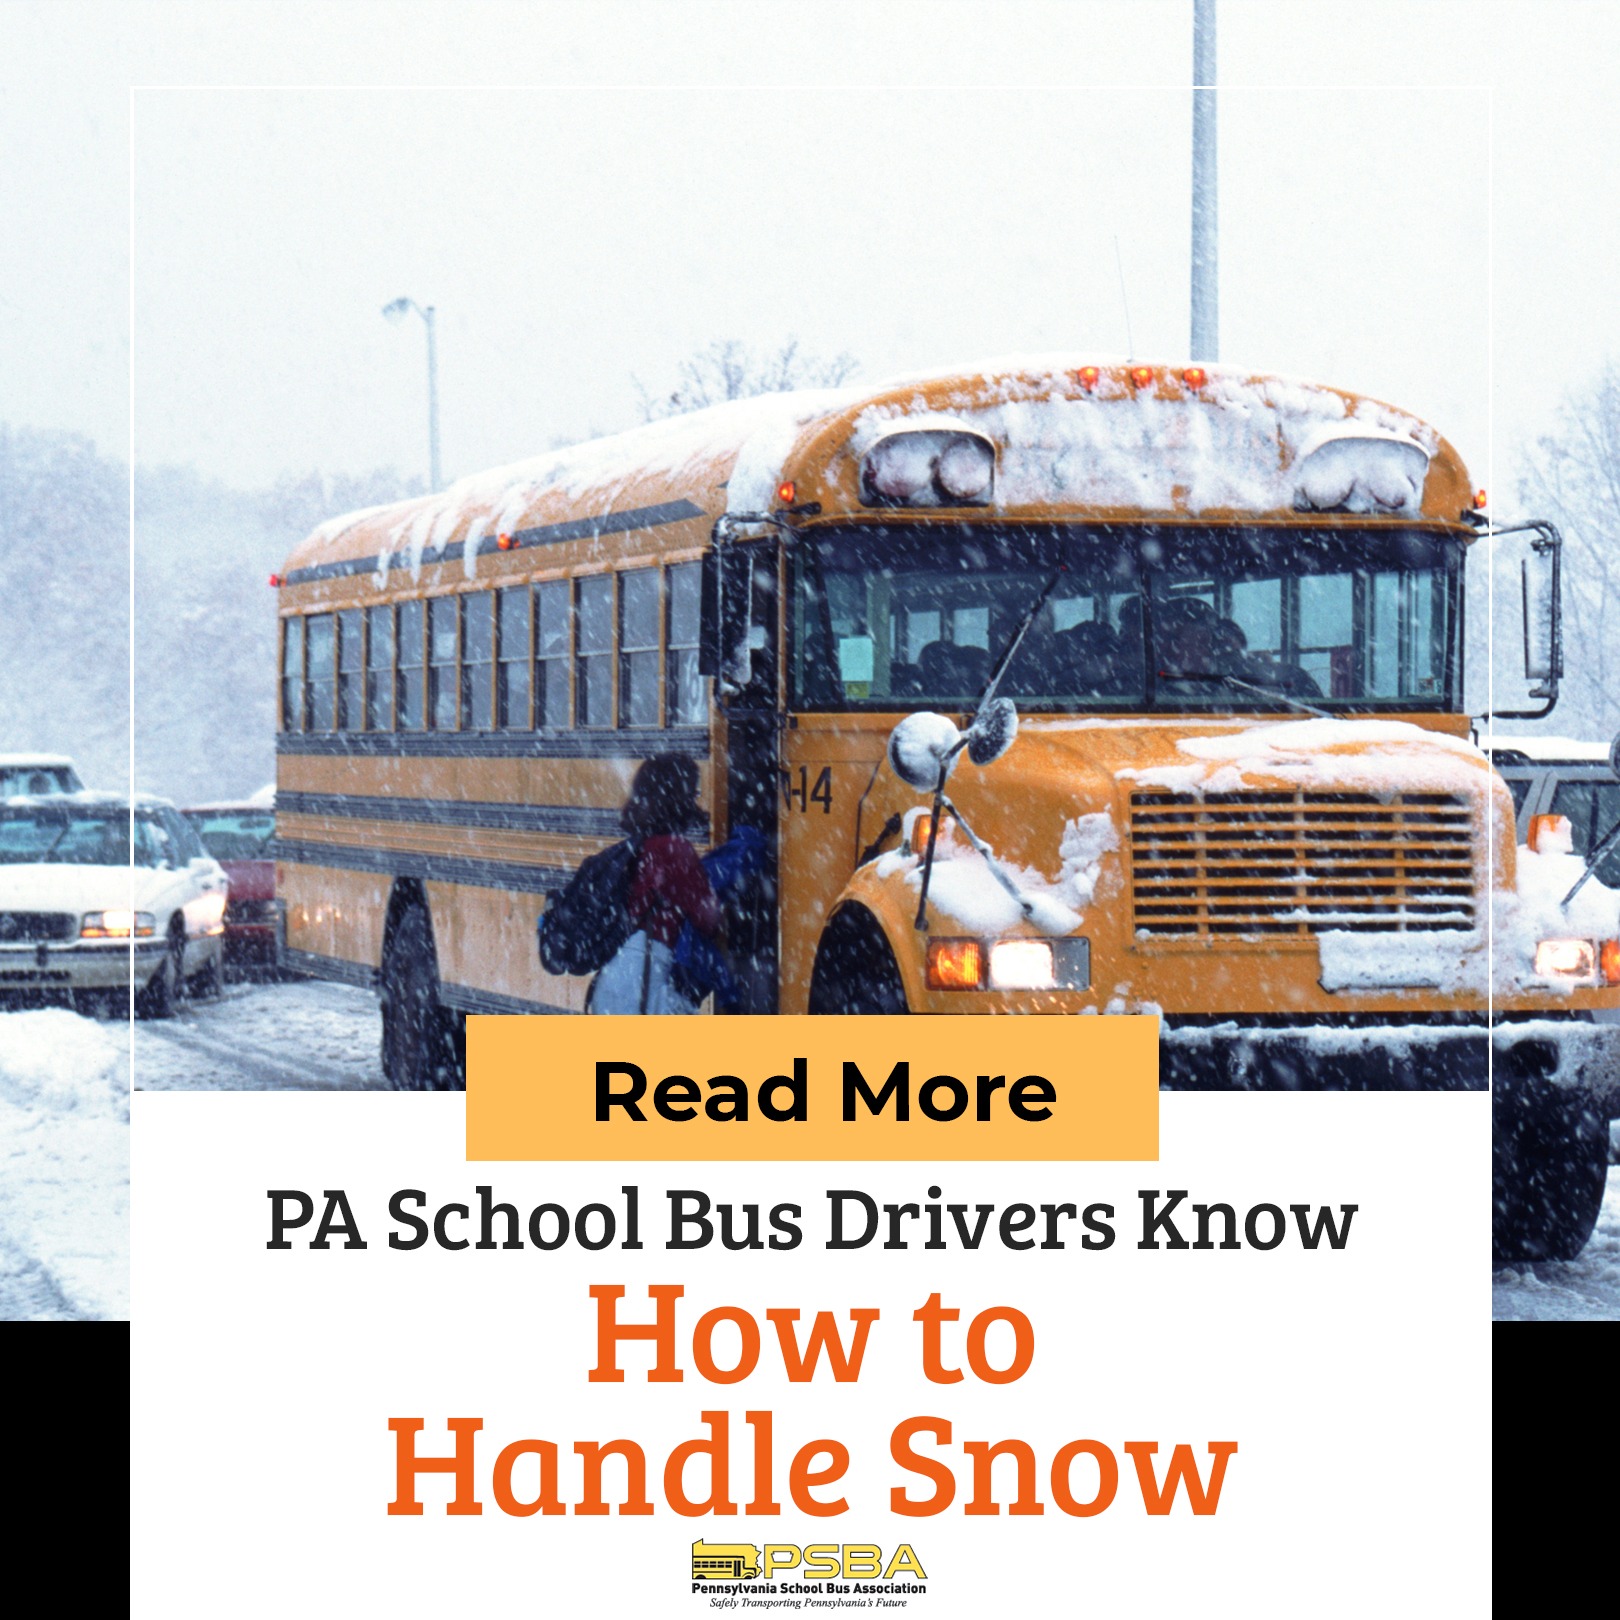 PA School Bus Drivers Know How to Handle Snow